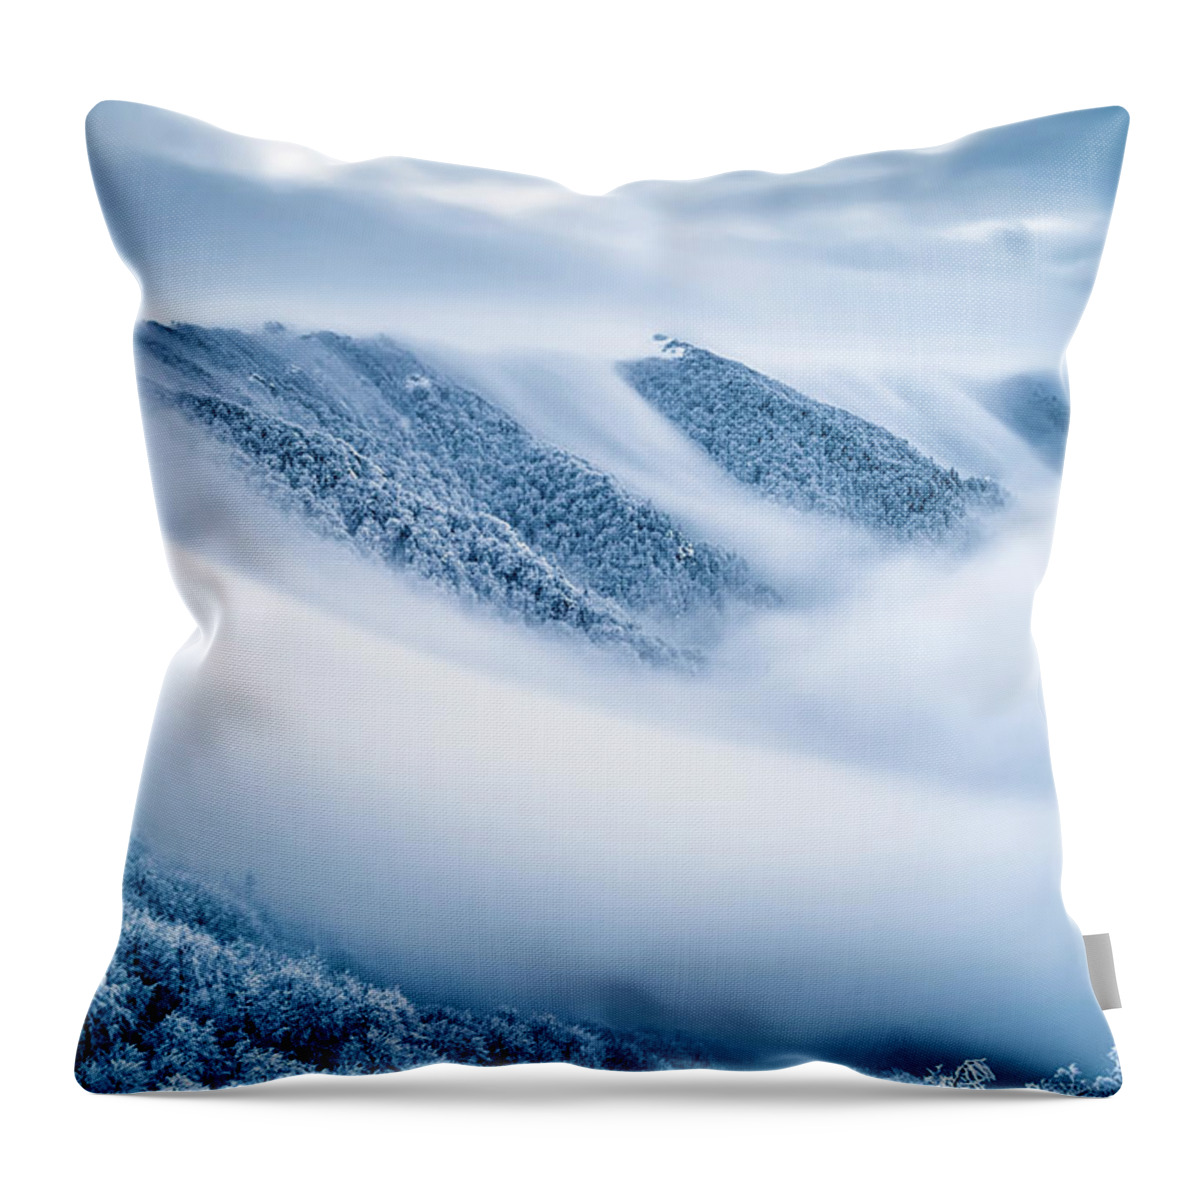 Balkan Mountains Throw Pillow featuring the photograph Kingdom Of the Mists by Evgeni Dinev